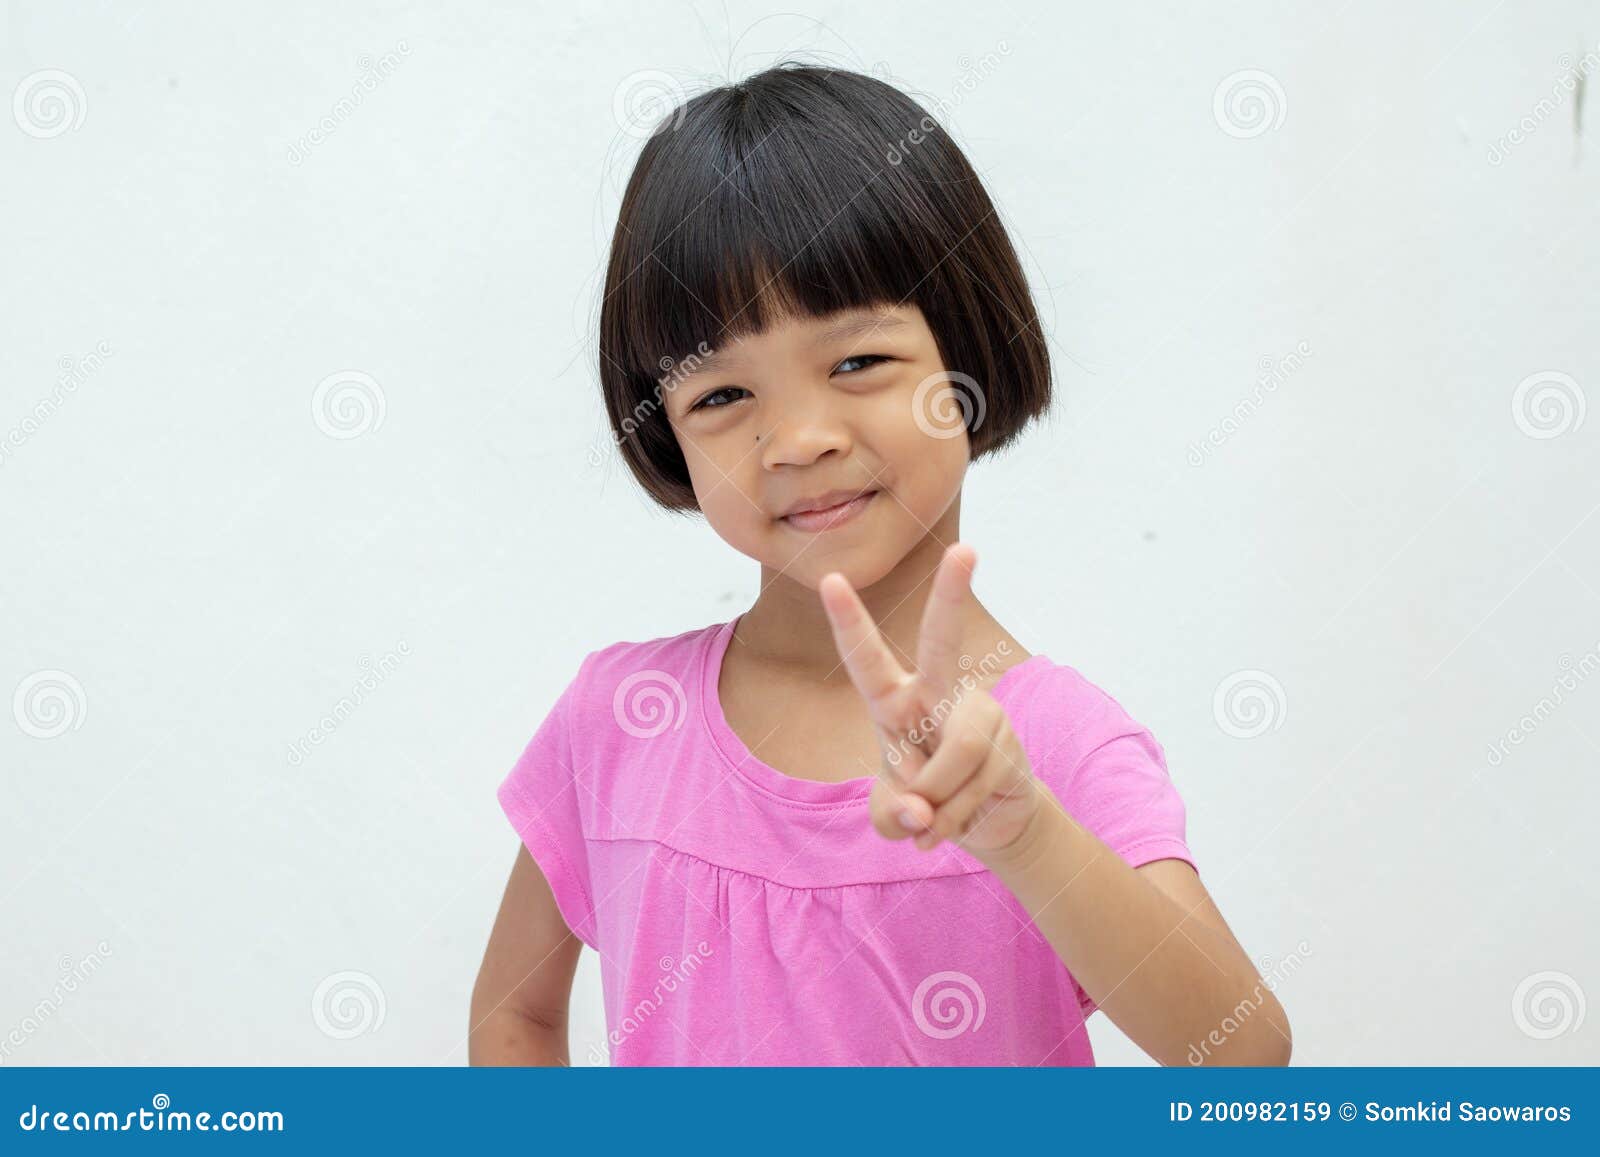 Asian Kid Girl Aged 4 To 6 Years Old with Short Hair, Cute Face and Smiling  Smile. Wear a Pink Shirt Raises the Right Hand and Stock Image - Image of  adorable, face: 200982159